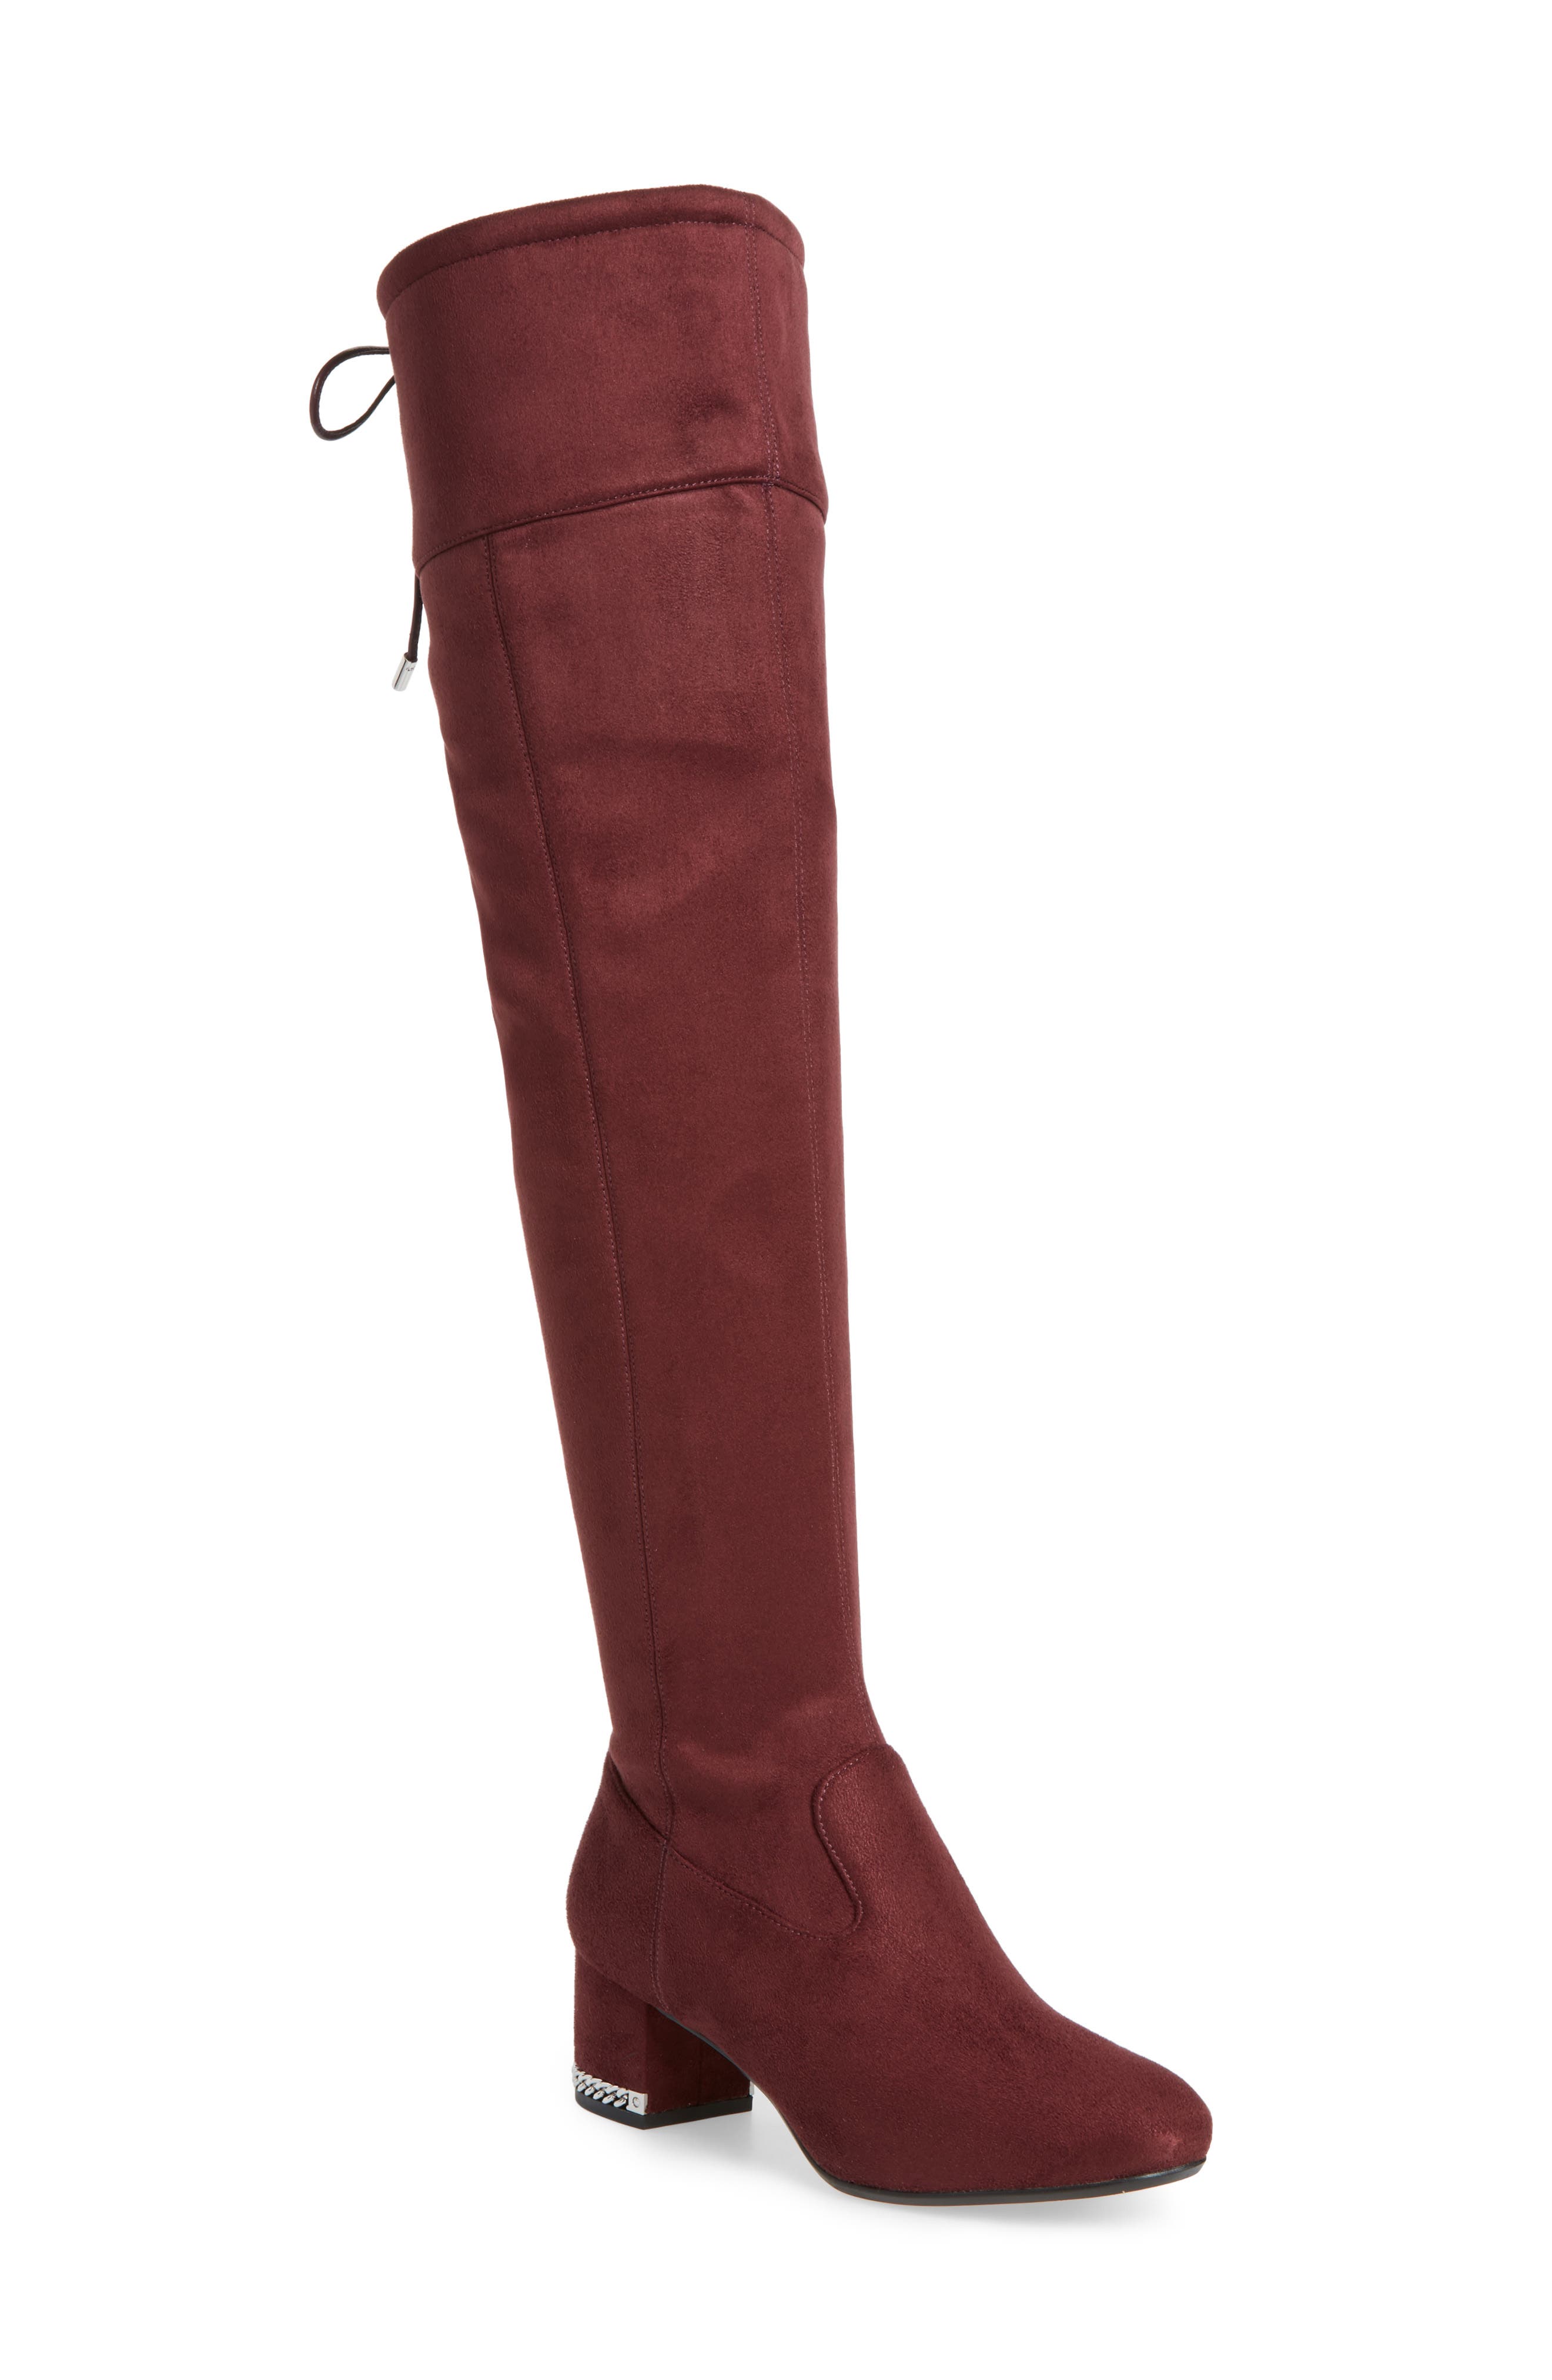 michael kors over the knee boots suede